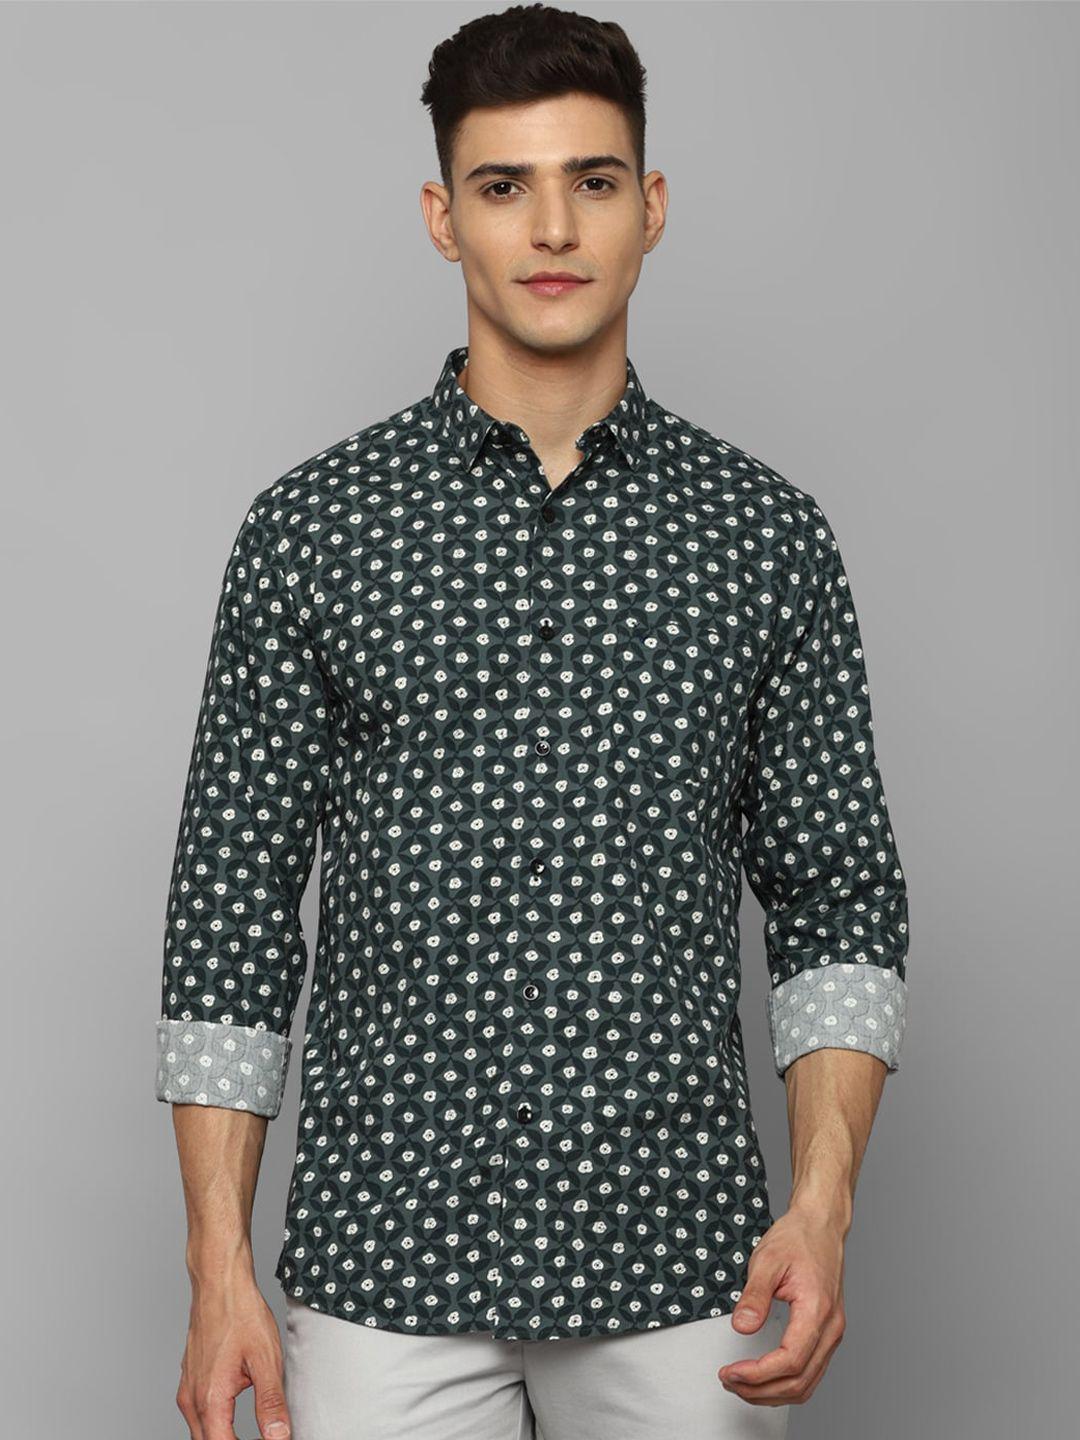 allen solly slim fit floral printed pure cotton casual shirt